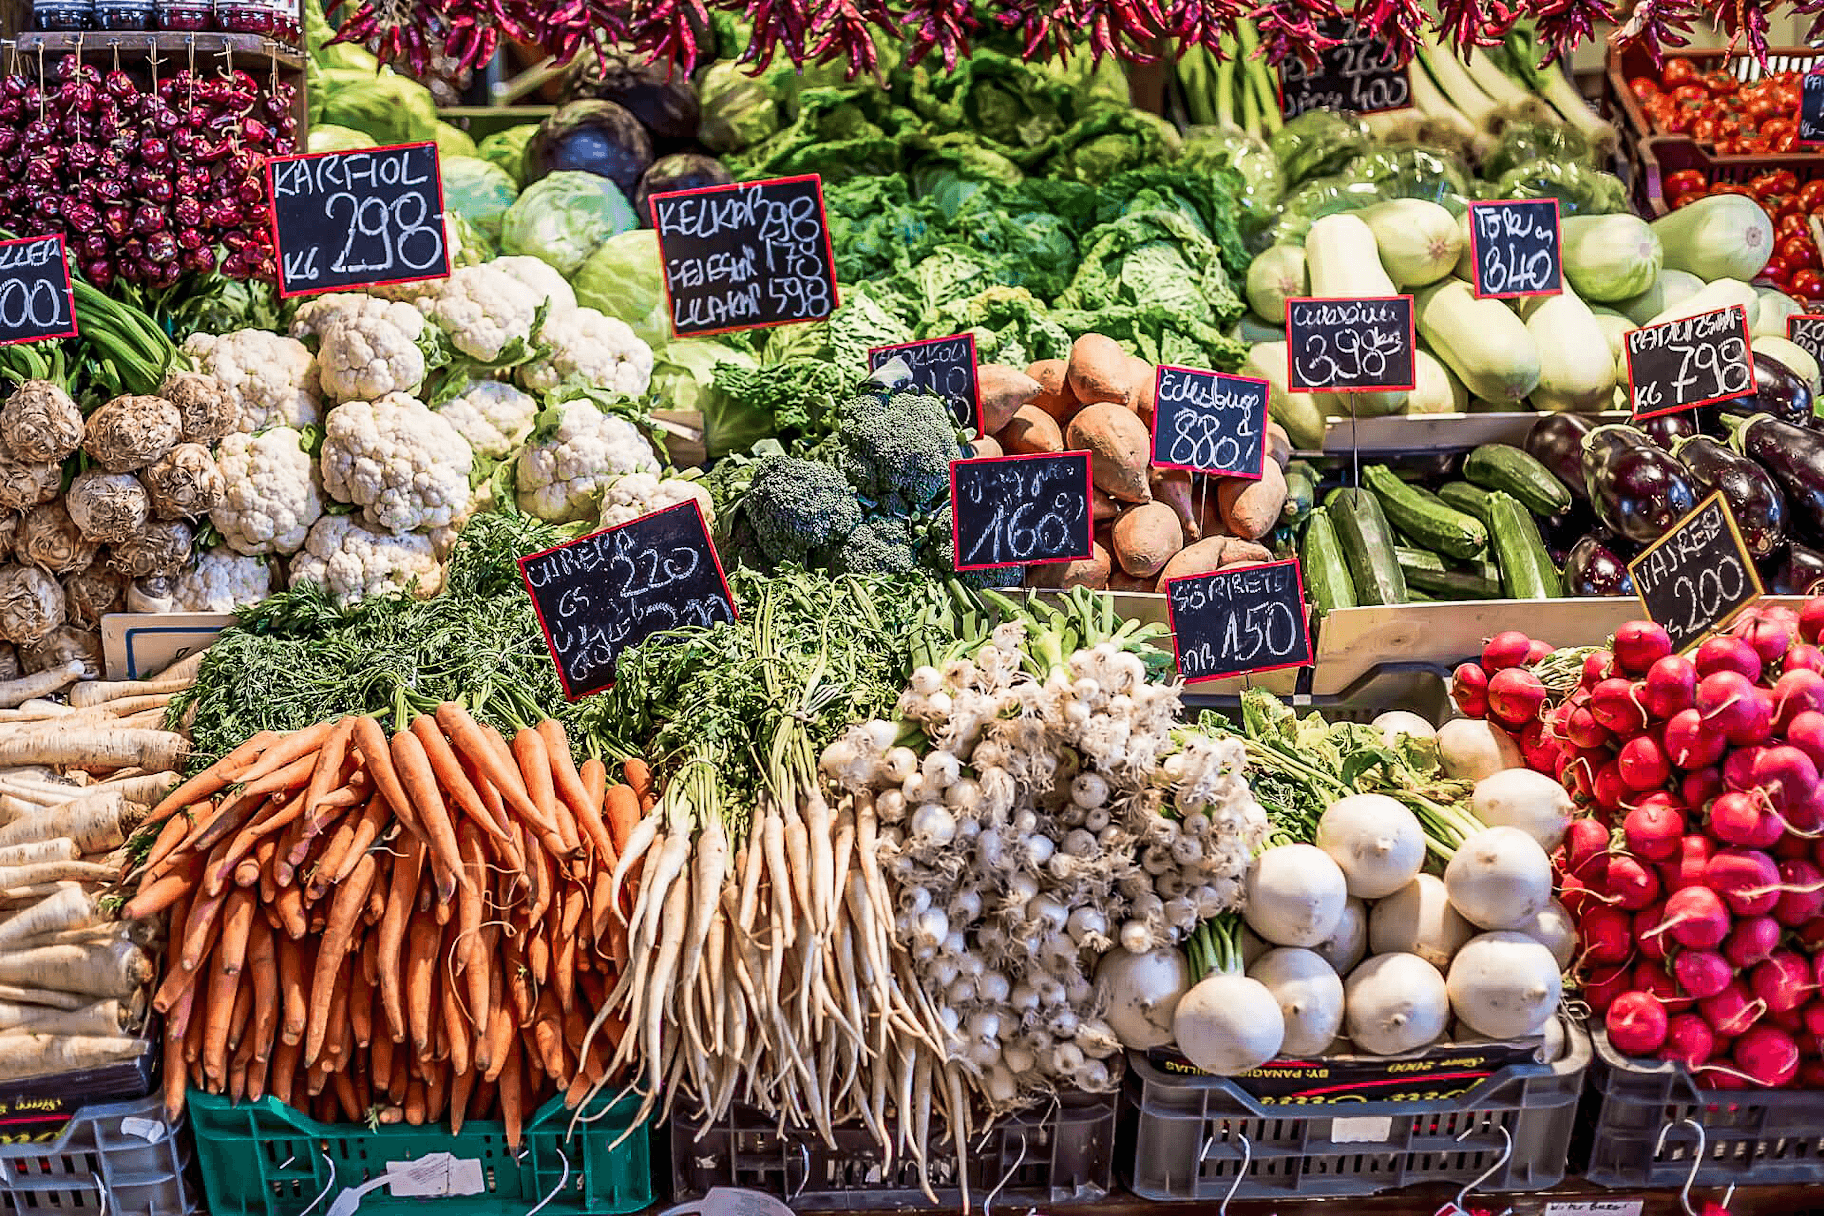 Regional and seasonal vegetables for a sustainable menu at a market.